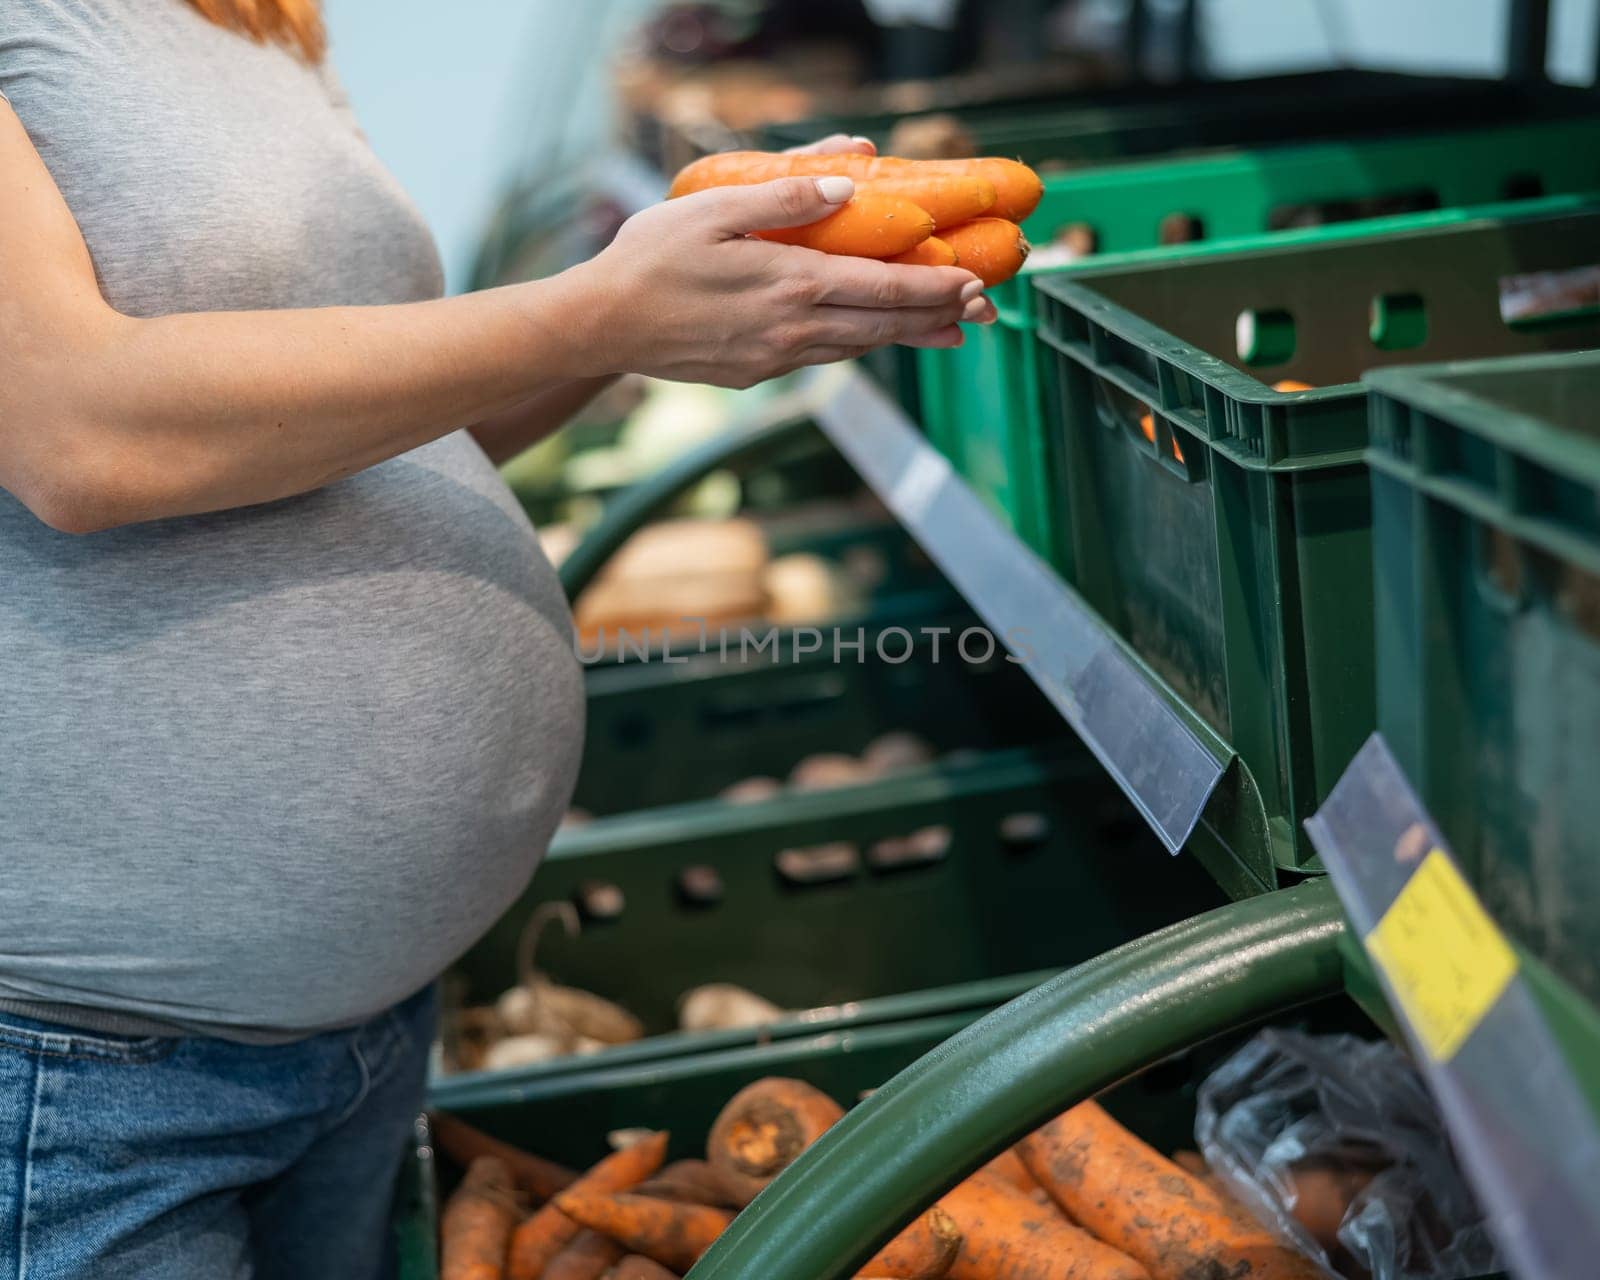 Pregnant woman buys carrots in the store